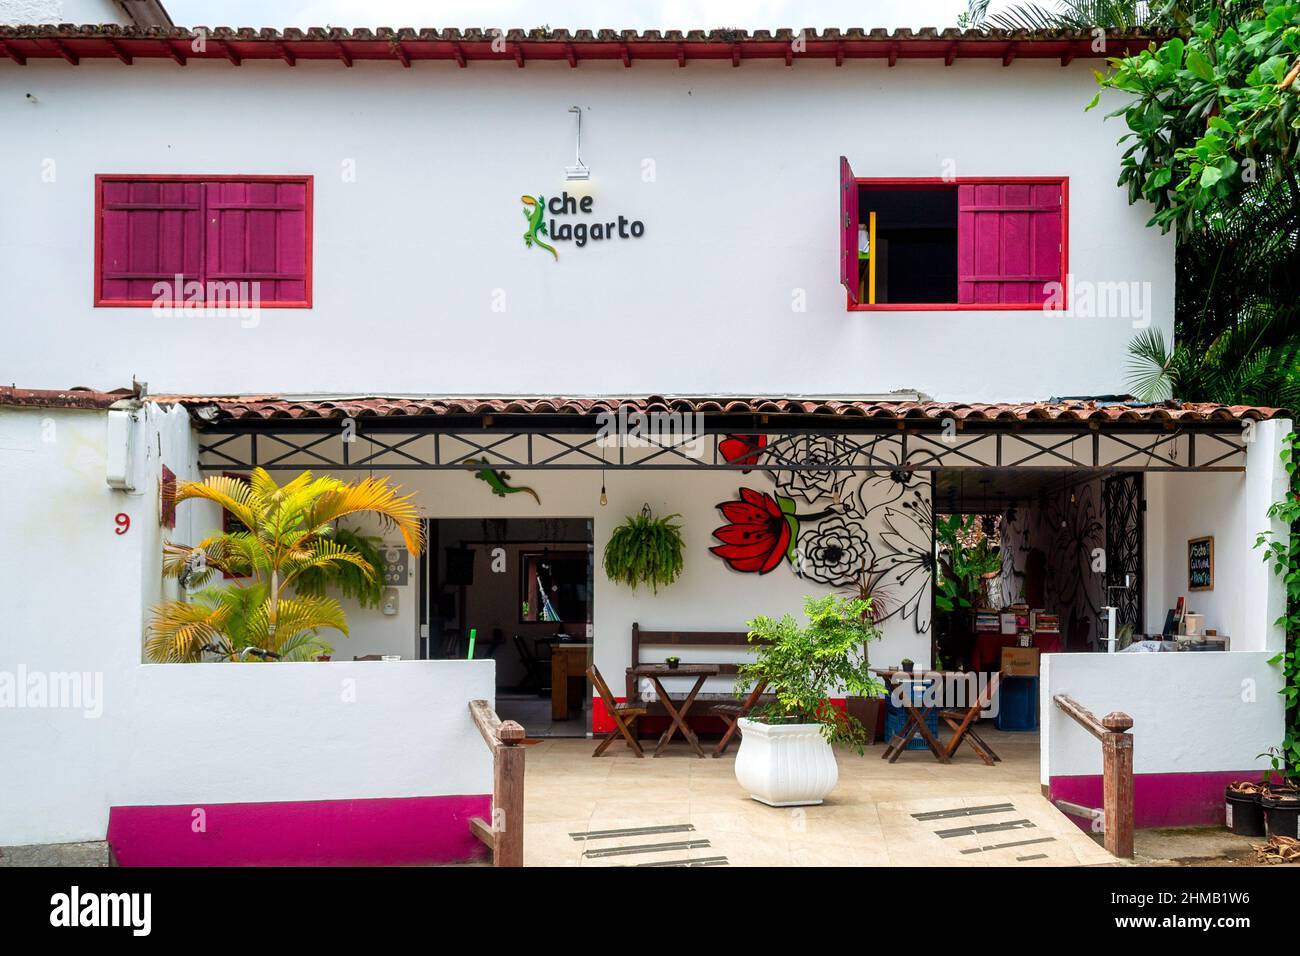 Che Lagarto Hostel. The small business establishment is popular among tourists visiting the town. Stock Photo